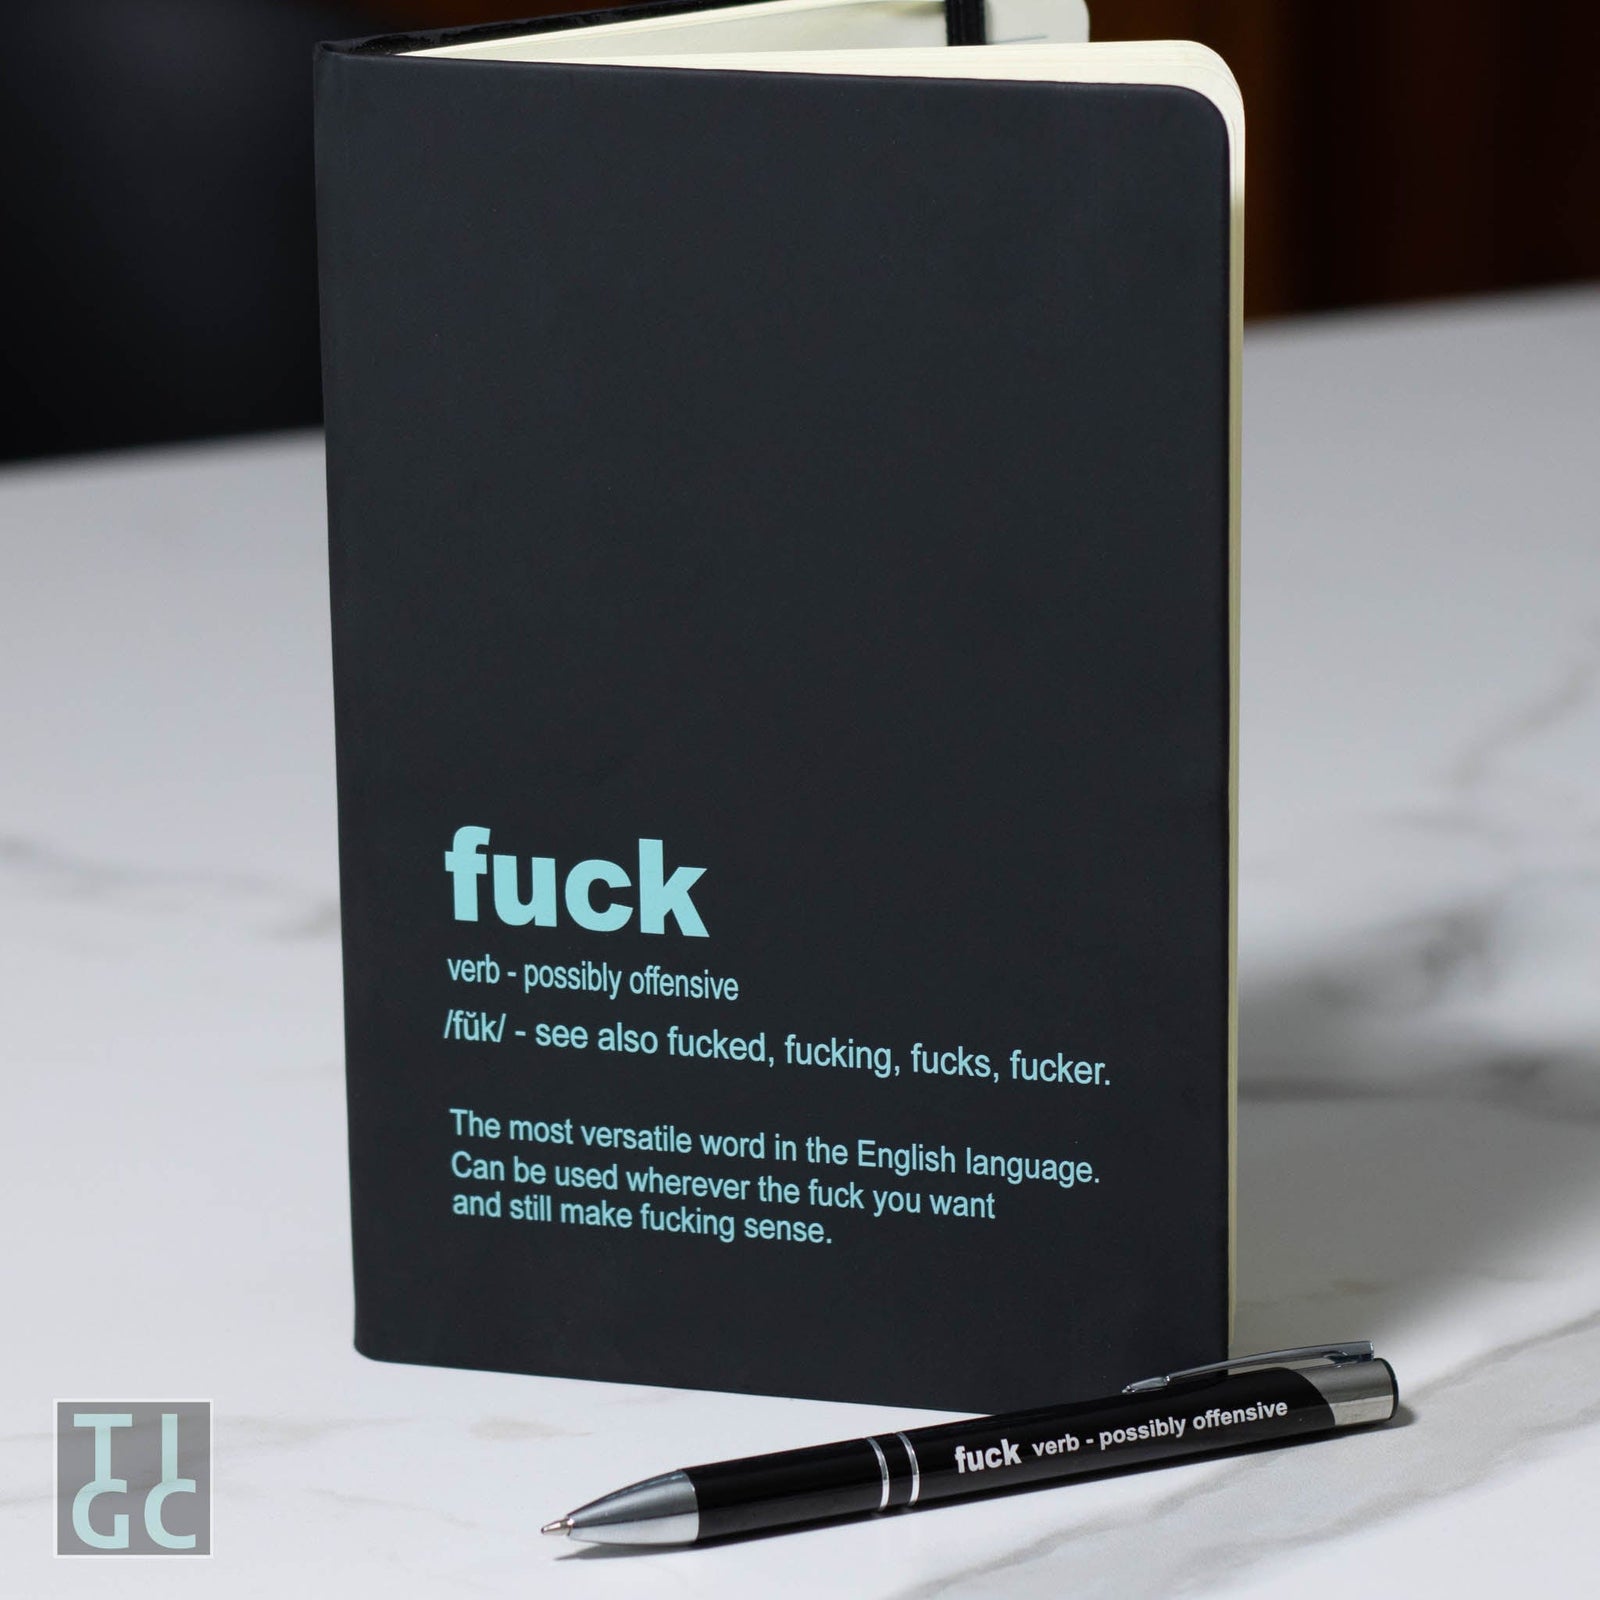 https://cdn.shopify.com/s/files/1/2423/8037/products/tigc-the-inappropriate-gift-co-fuck-definition-notebook-and-pen-combo-30518375120938_1600x.jpg?v=1679472442